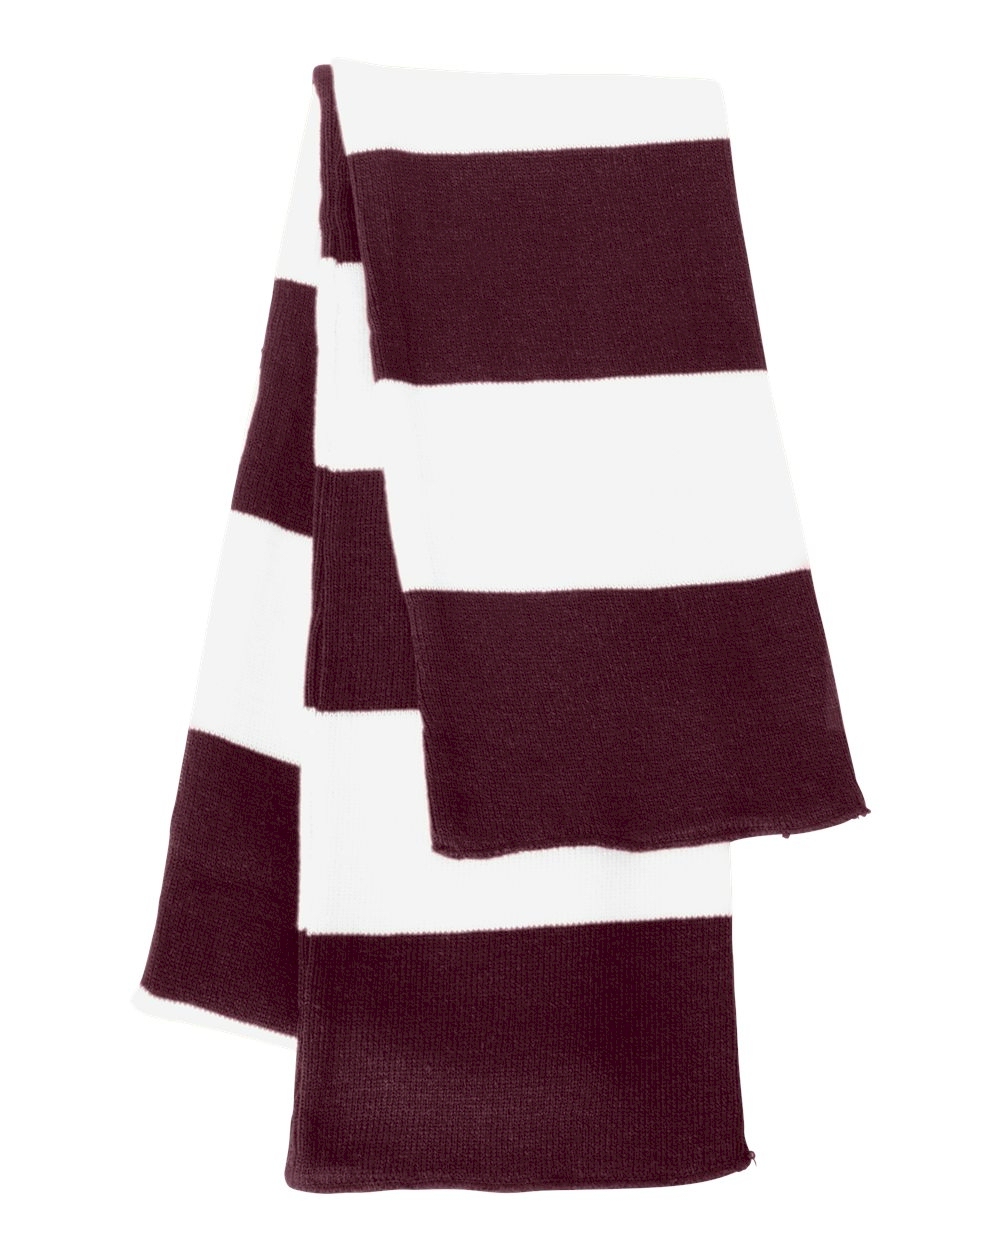 Rugby Striped Knit Scarf Embroidery Blanks - MAROON/WHITE